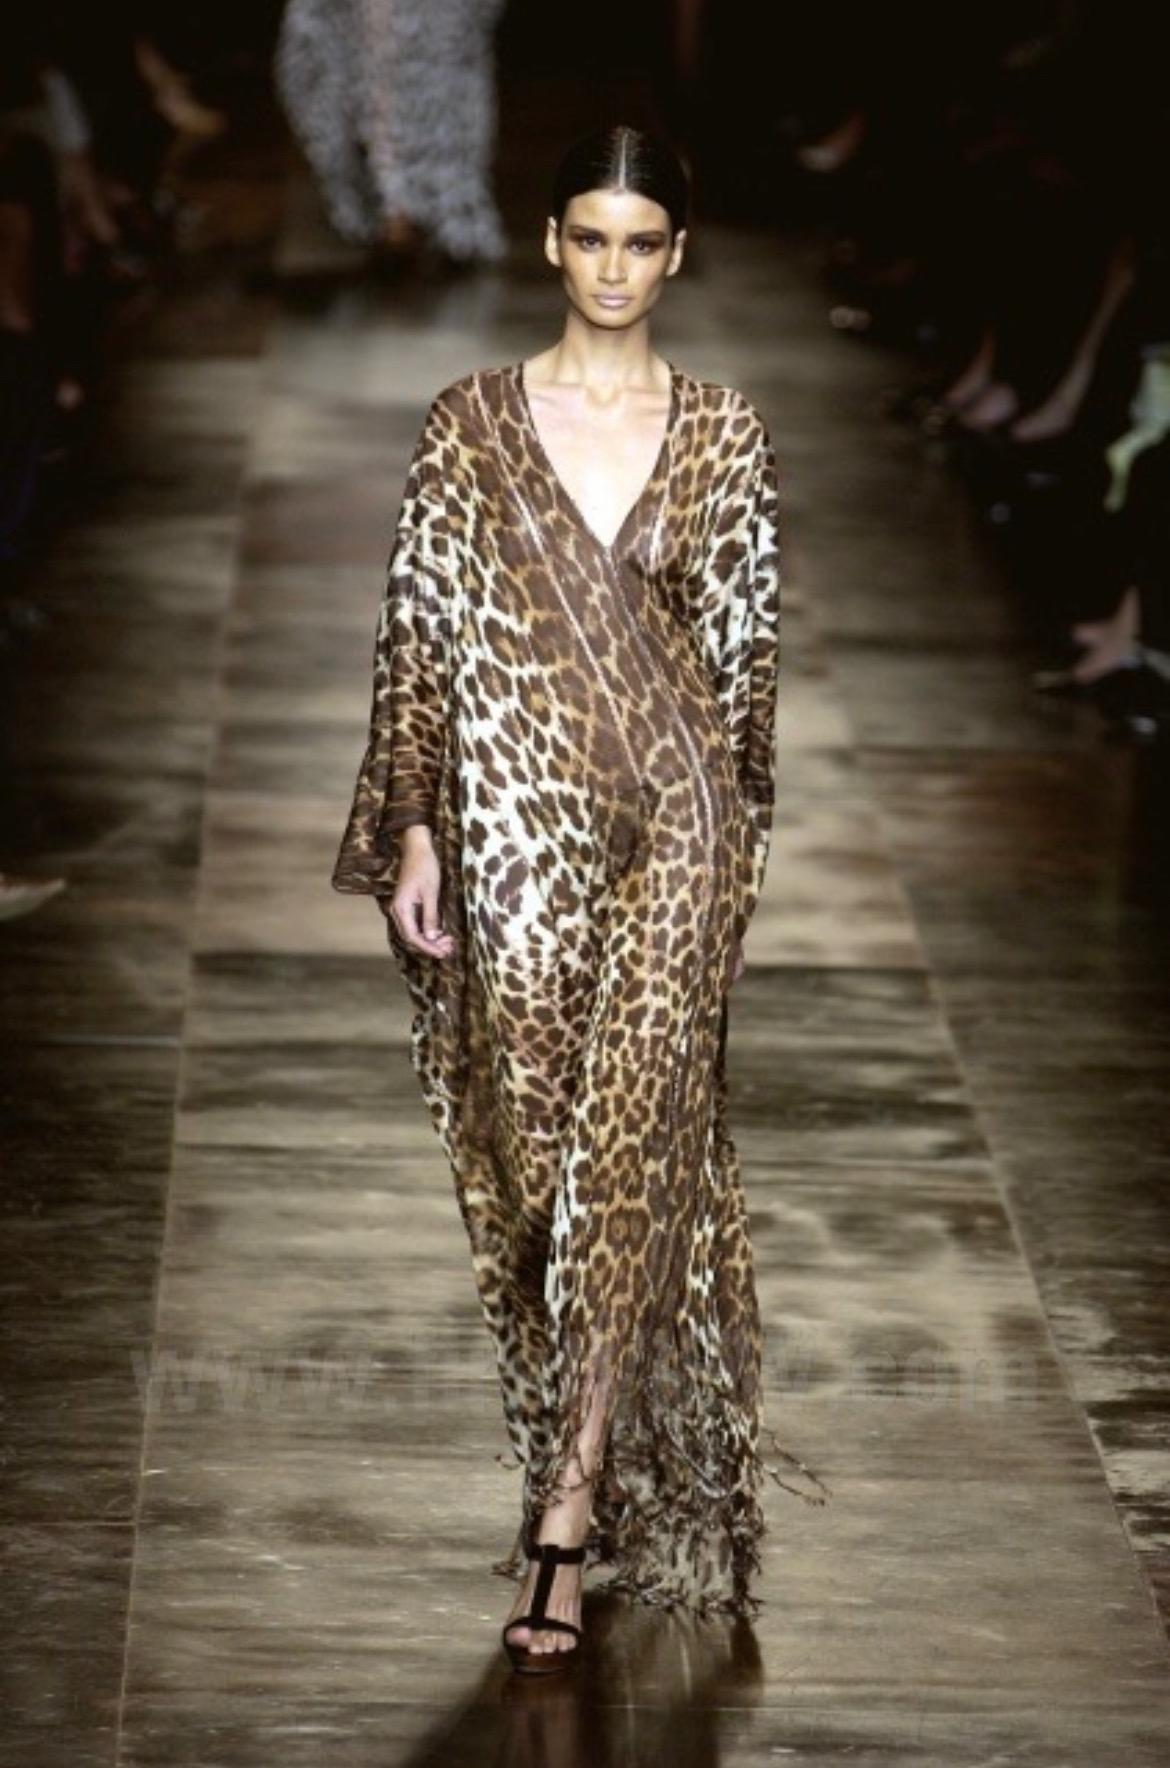 TheRealList presents: an absolutely fabulous cheetah print Yves Saint Laurent Rive Gauche caftan, designed by Tom Ford. From the Spring/Summer 2002 collection, this caftan debuted on the season's runway as look 39 modeled by Caroline Ribeiro. This